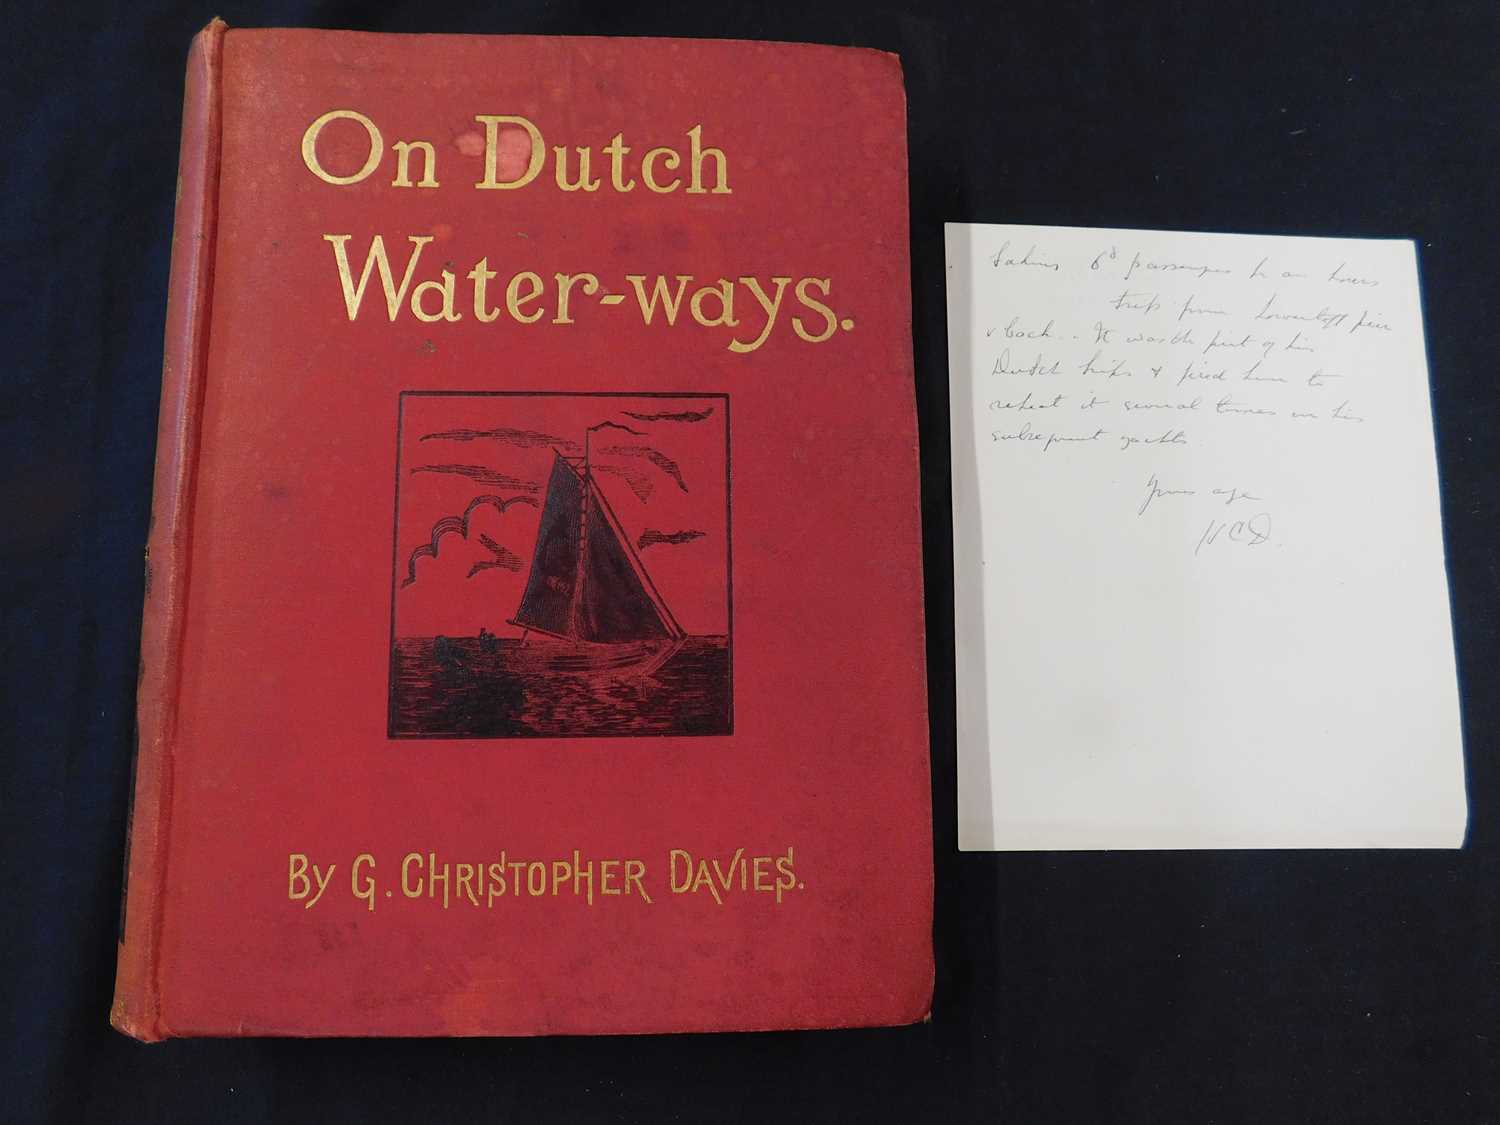 G Christopher Davies "On Dutch Waterways", bearing inscription and signature together with letter - Image 2 of 2